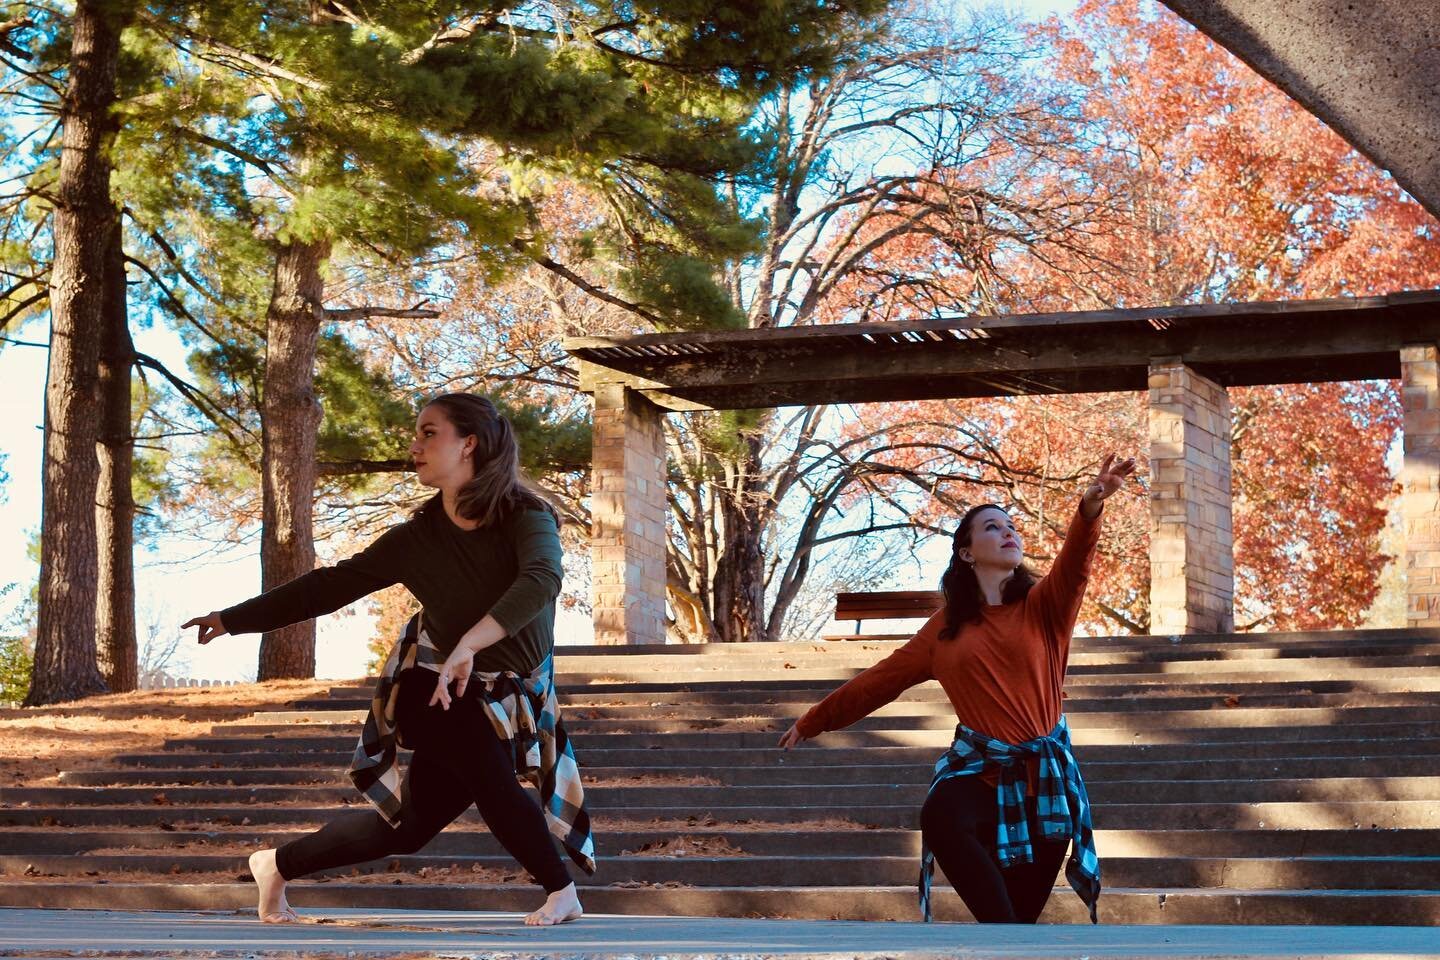 We filmed a new dance called Shared Spaces choreographed by Abri Effland and performed by her and Katie McCormick. We are so thrilled to work with these talented ladies again!

We are also excited to welcome our newest volunteer, Braden Powell! He is